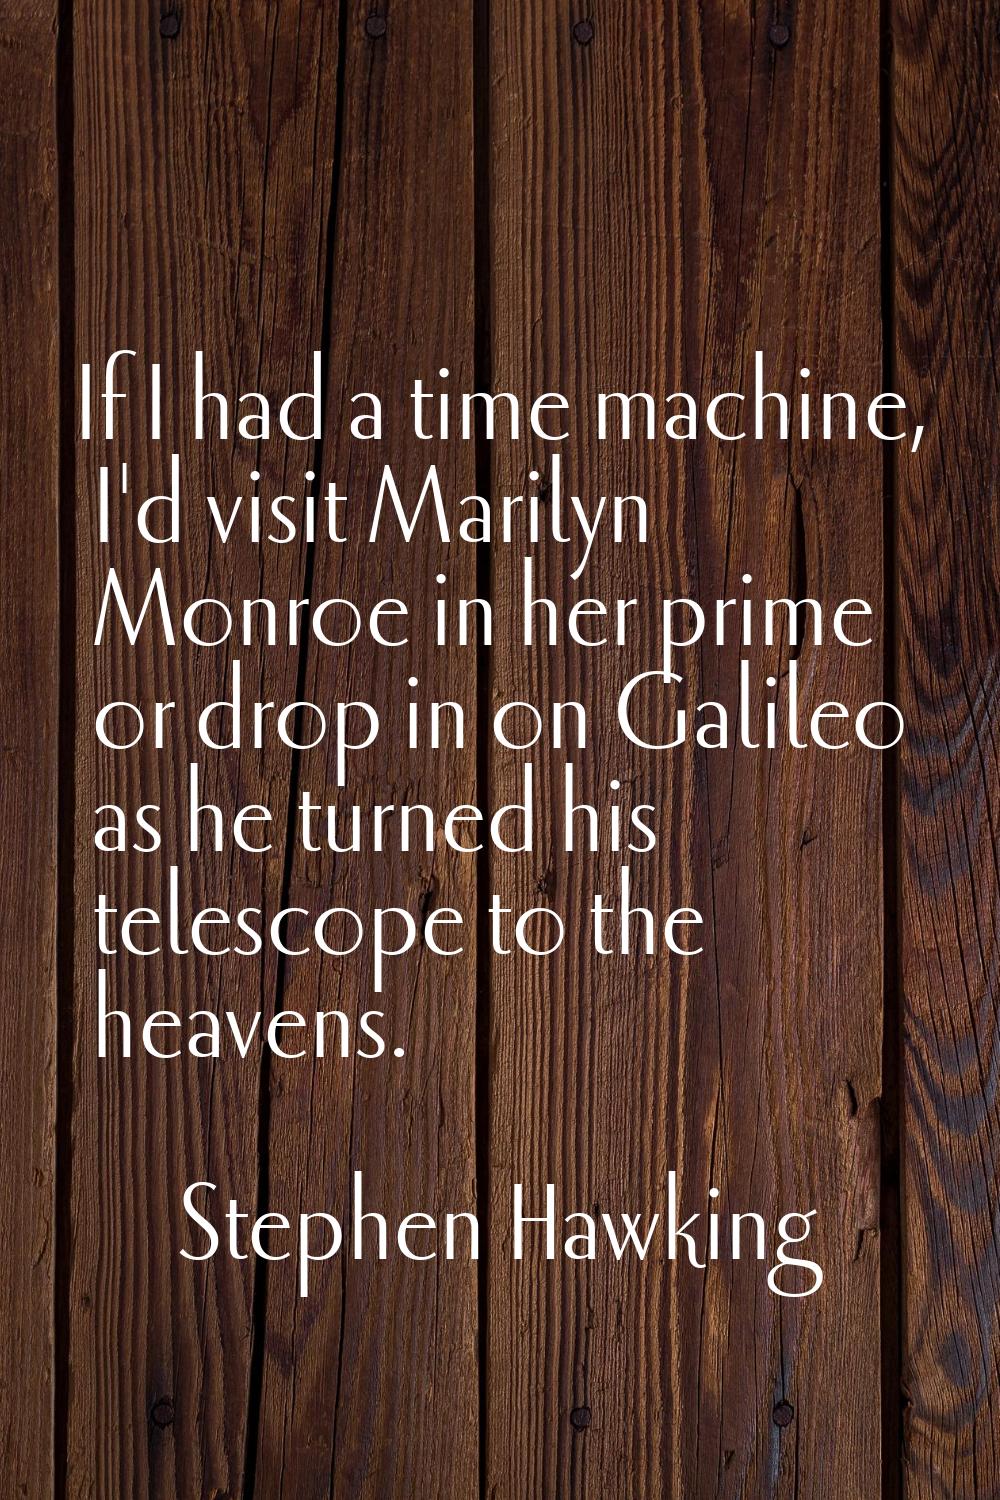 If I had a time machine, I'd visit Marilyn Monroe in her prime or drop in on Galileo as he turned h